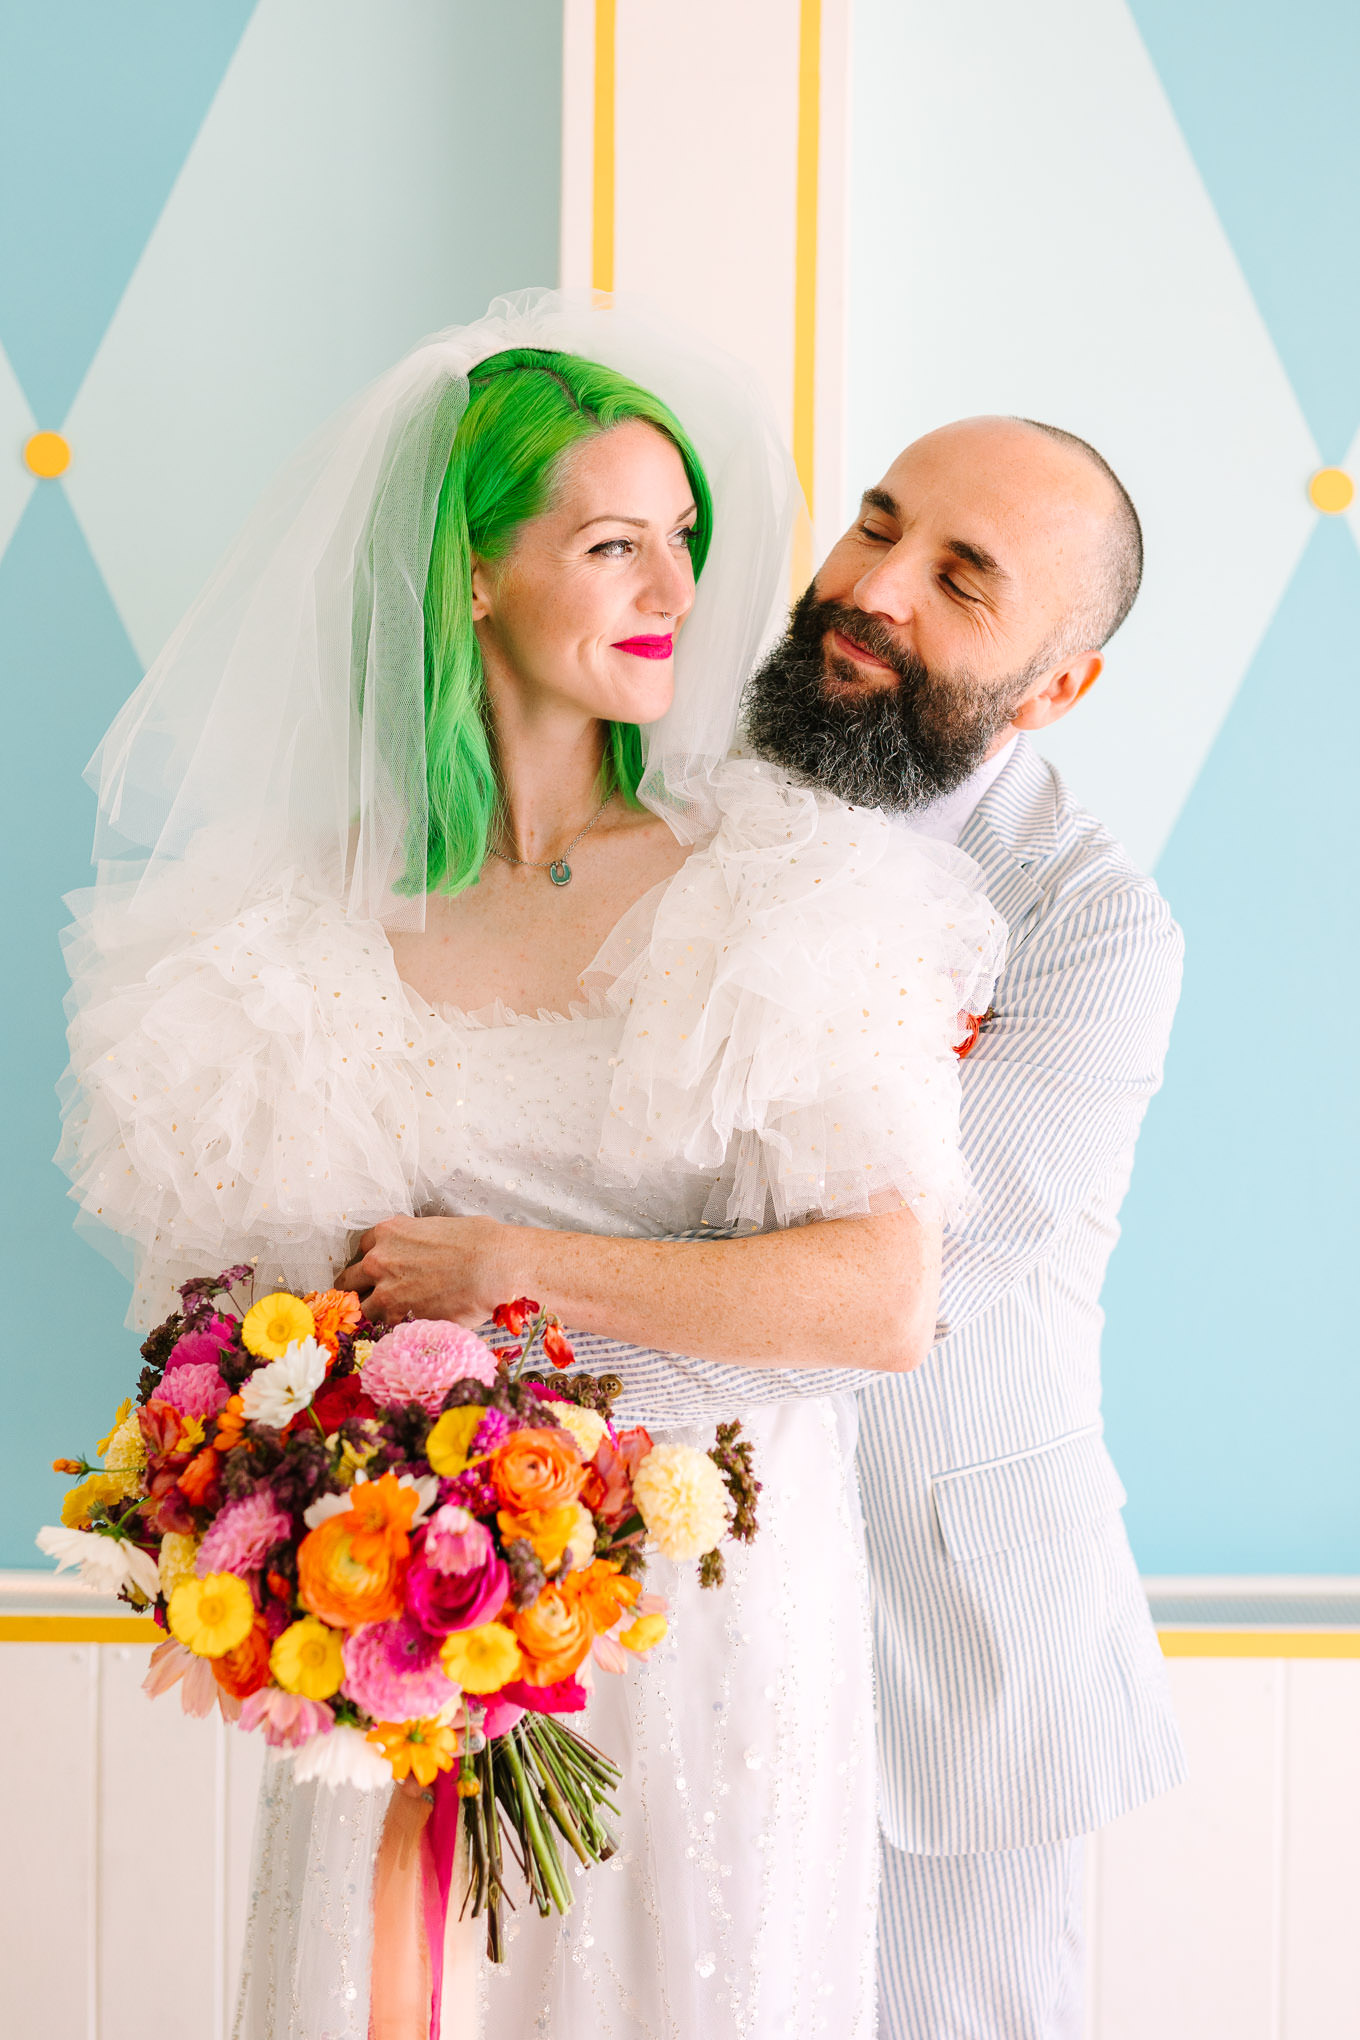 Bob Baker Marionette Elopement | Wedding and elopement photography roundup | Los Angeles and Palm Springs photographer | #losangeleswedding #palmspringswedding #elopementphotographer Source: Mary Costa Photography | Los Angeles